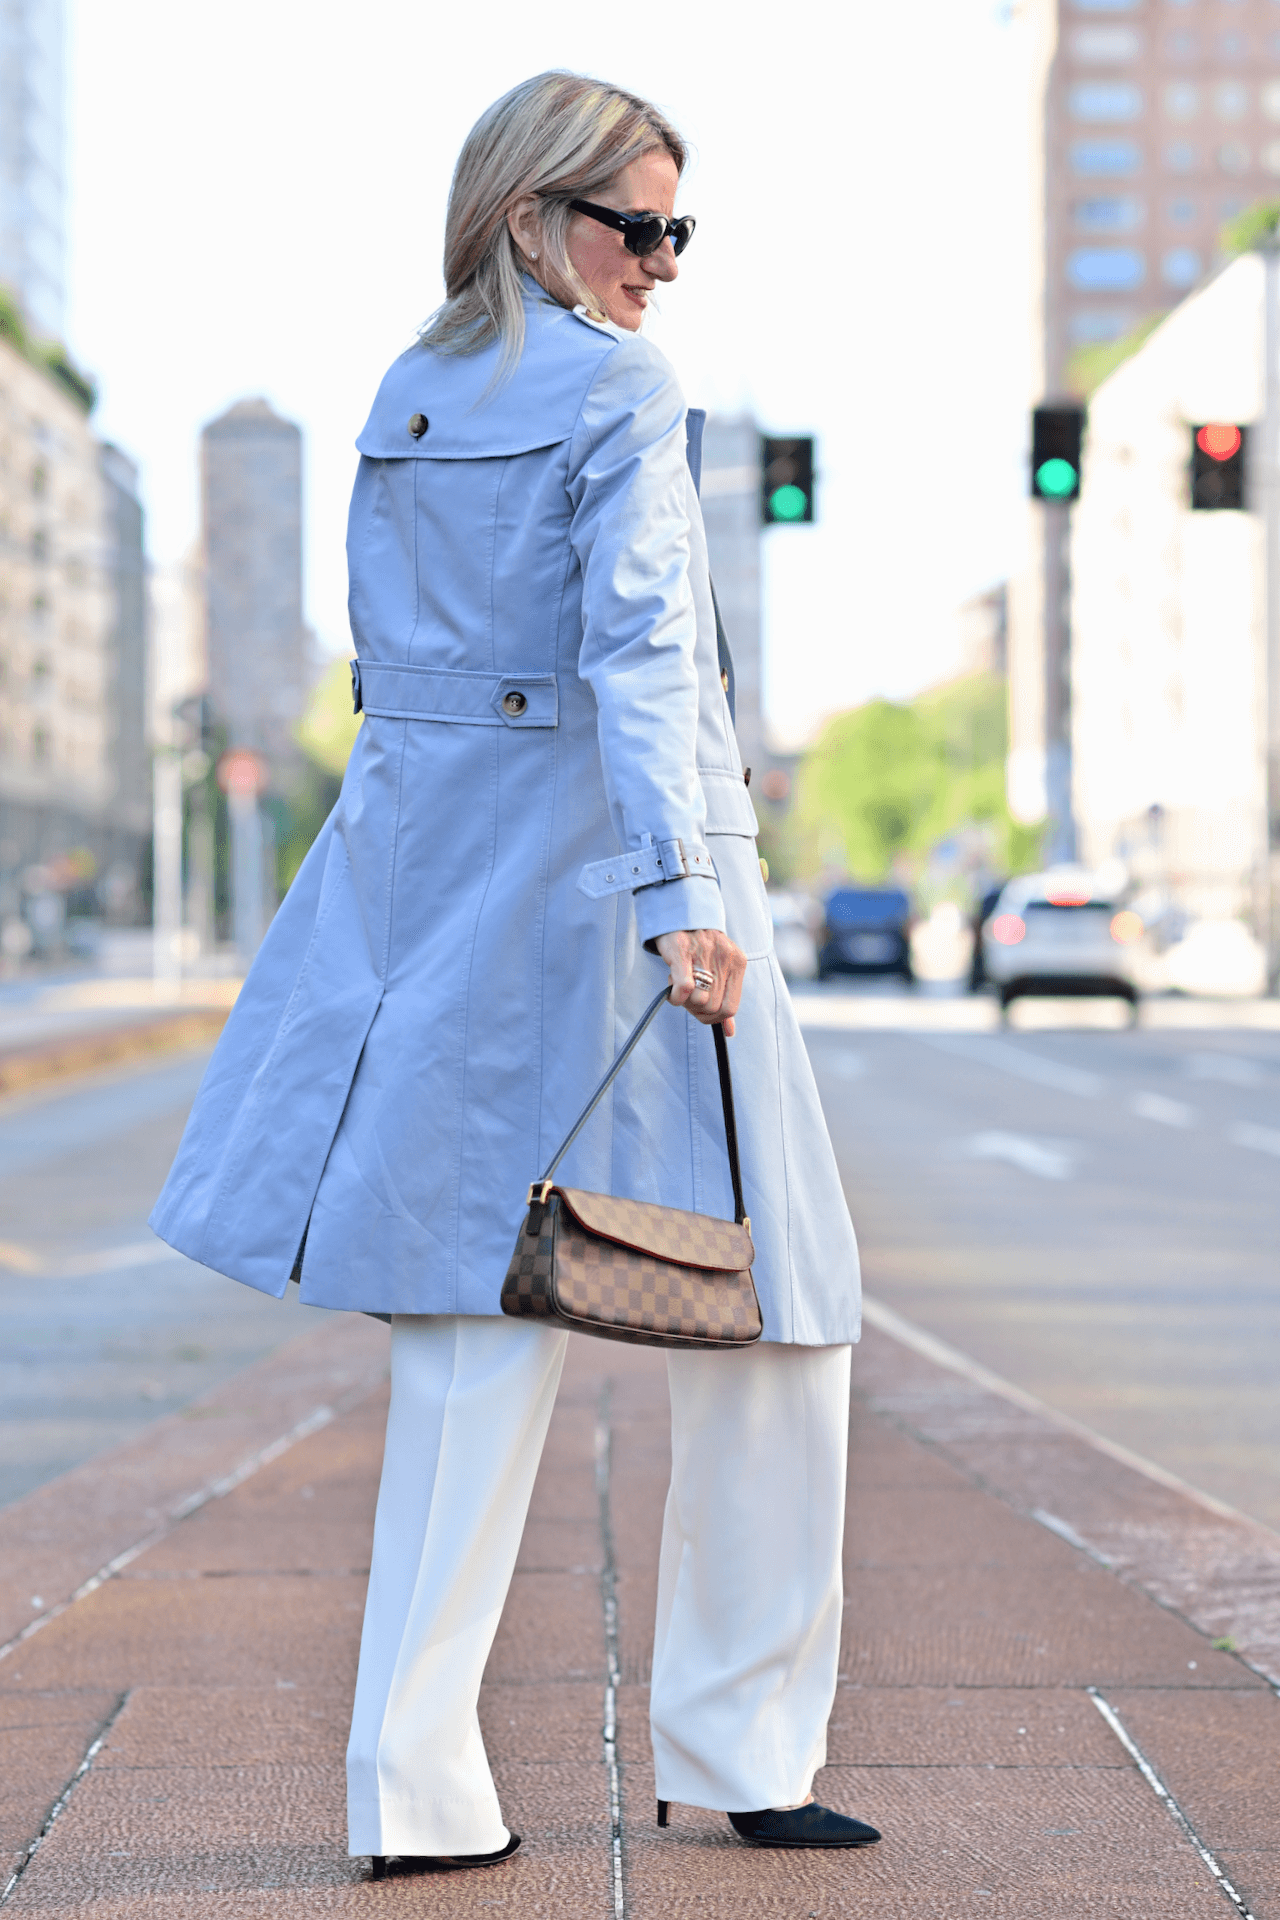 How to Choose the Right Trench Coat For You